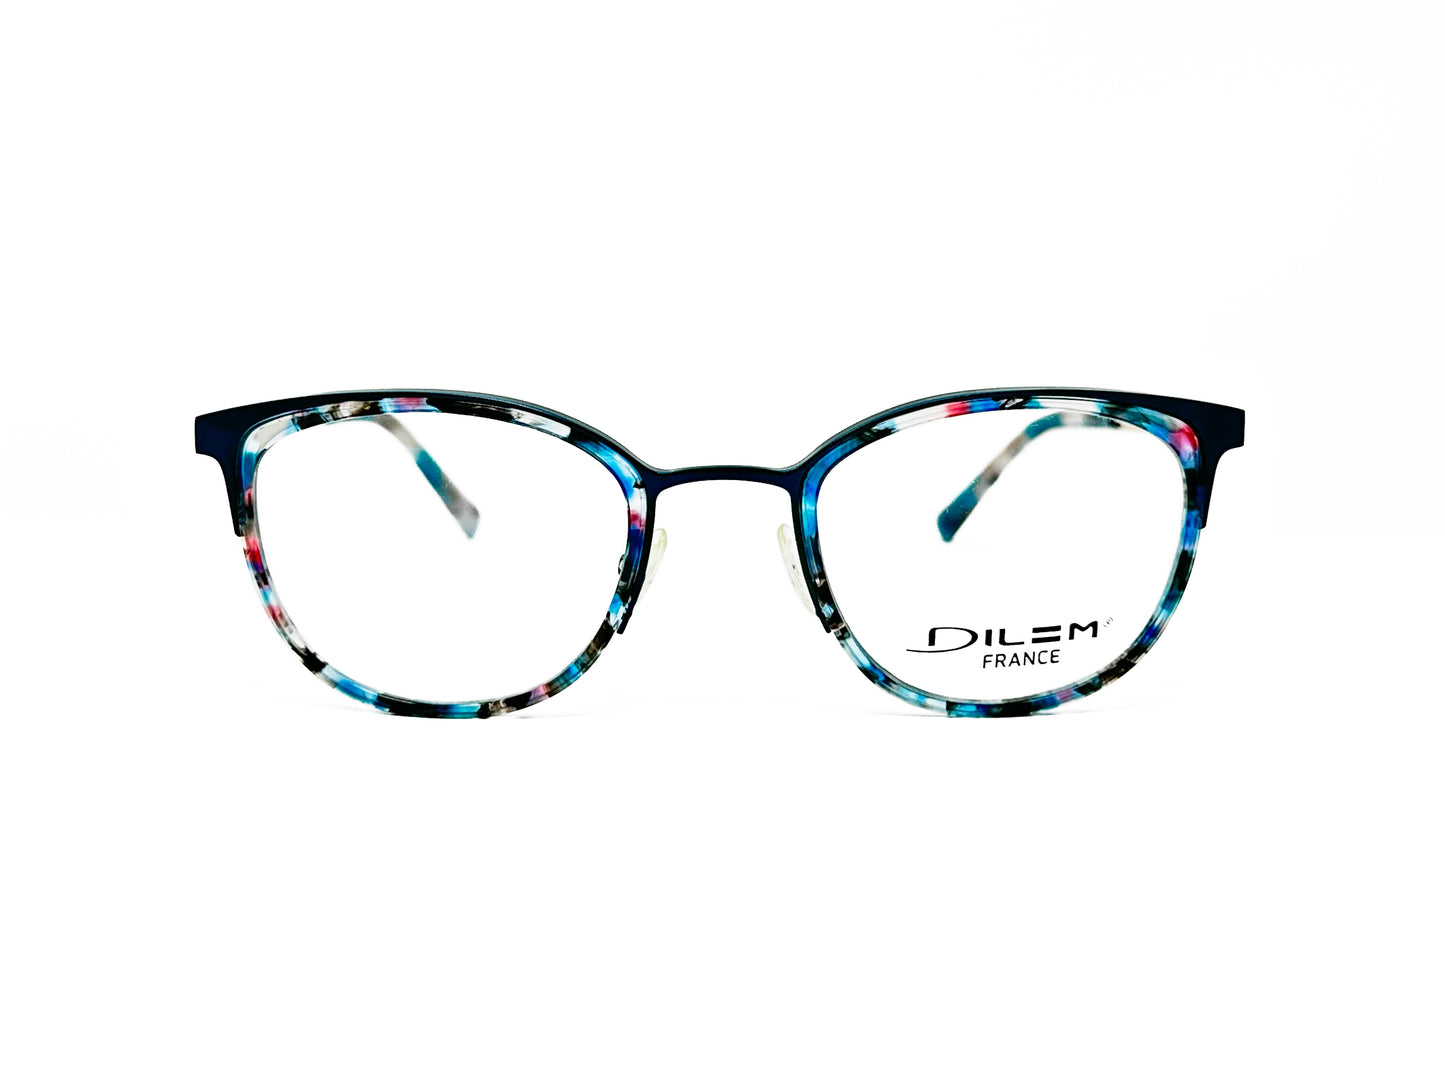 Dilem round metal frame with wing tips and acetate insert lining. Model: ZU108. Color: 2JA02 - Multi-color blue acetate insert with black metal. Front view. 